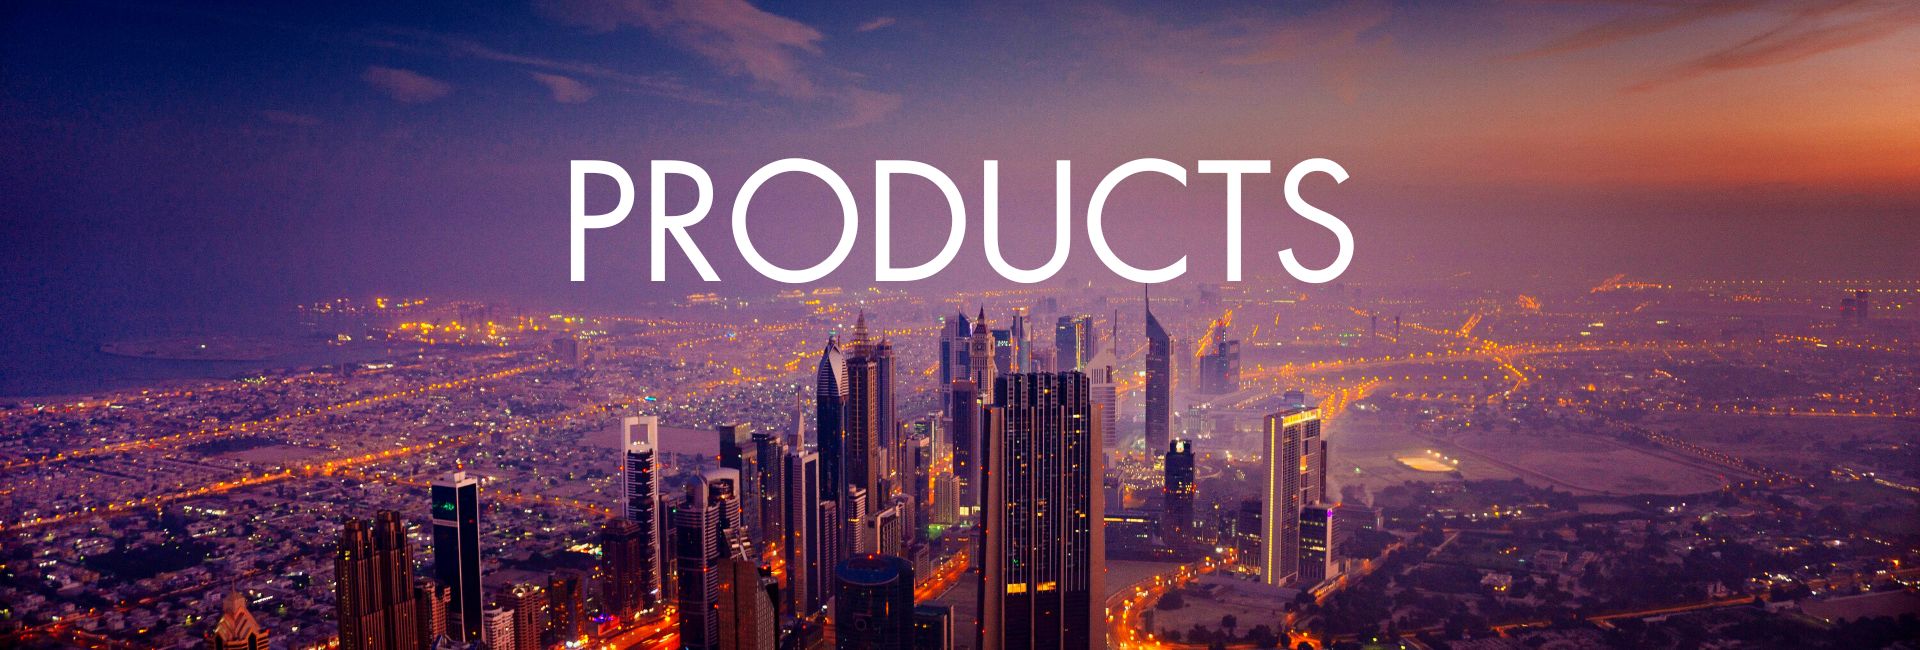 Products Banner Image